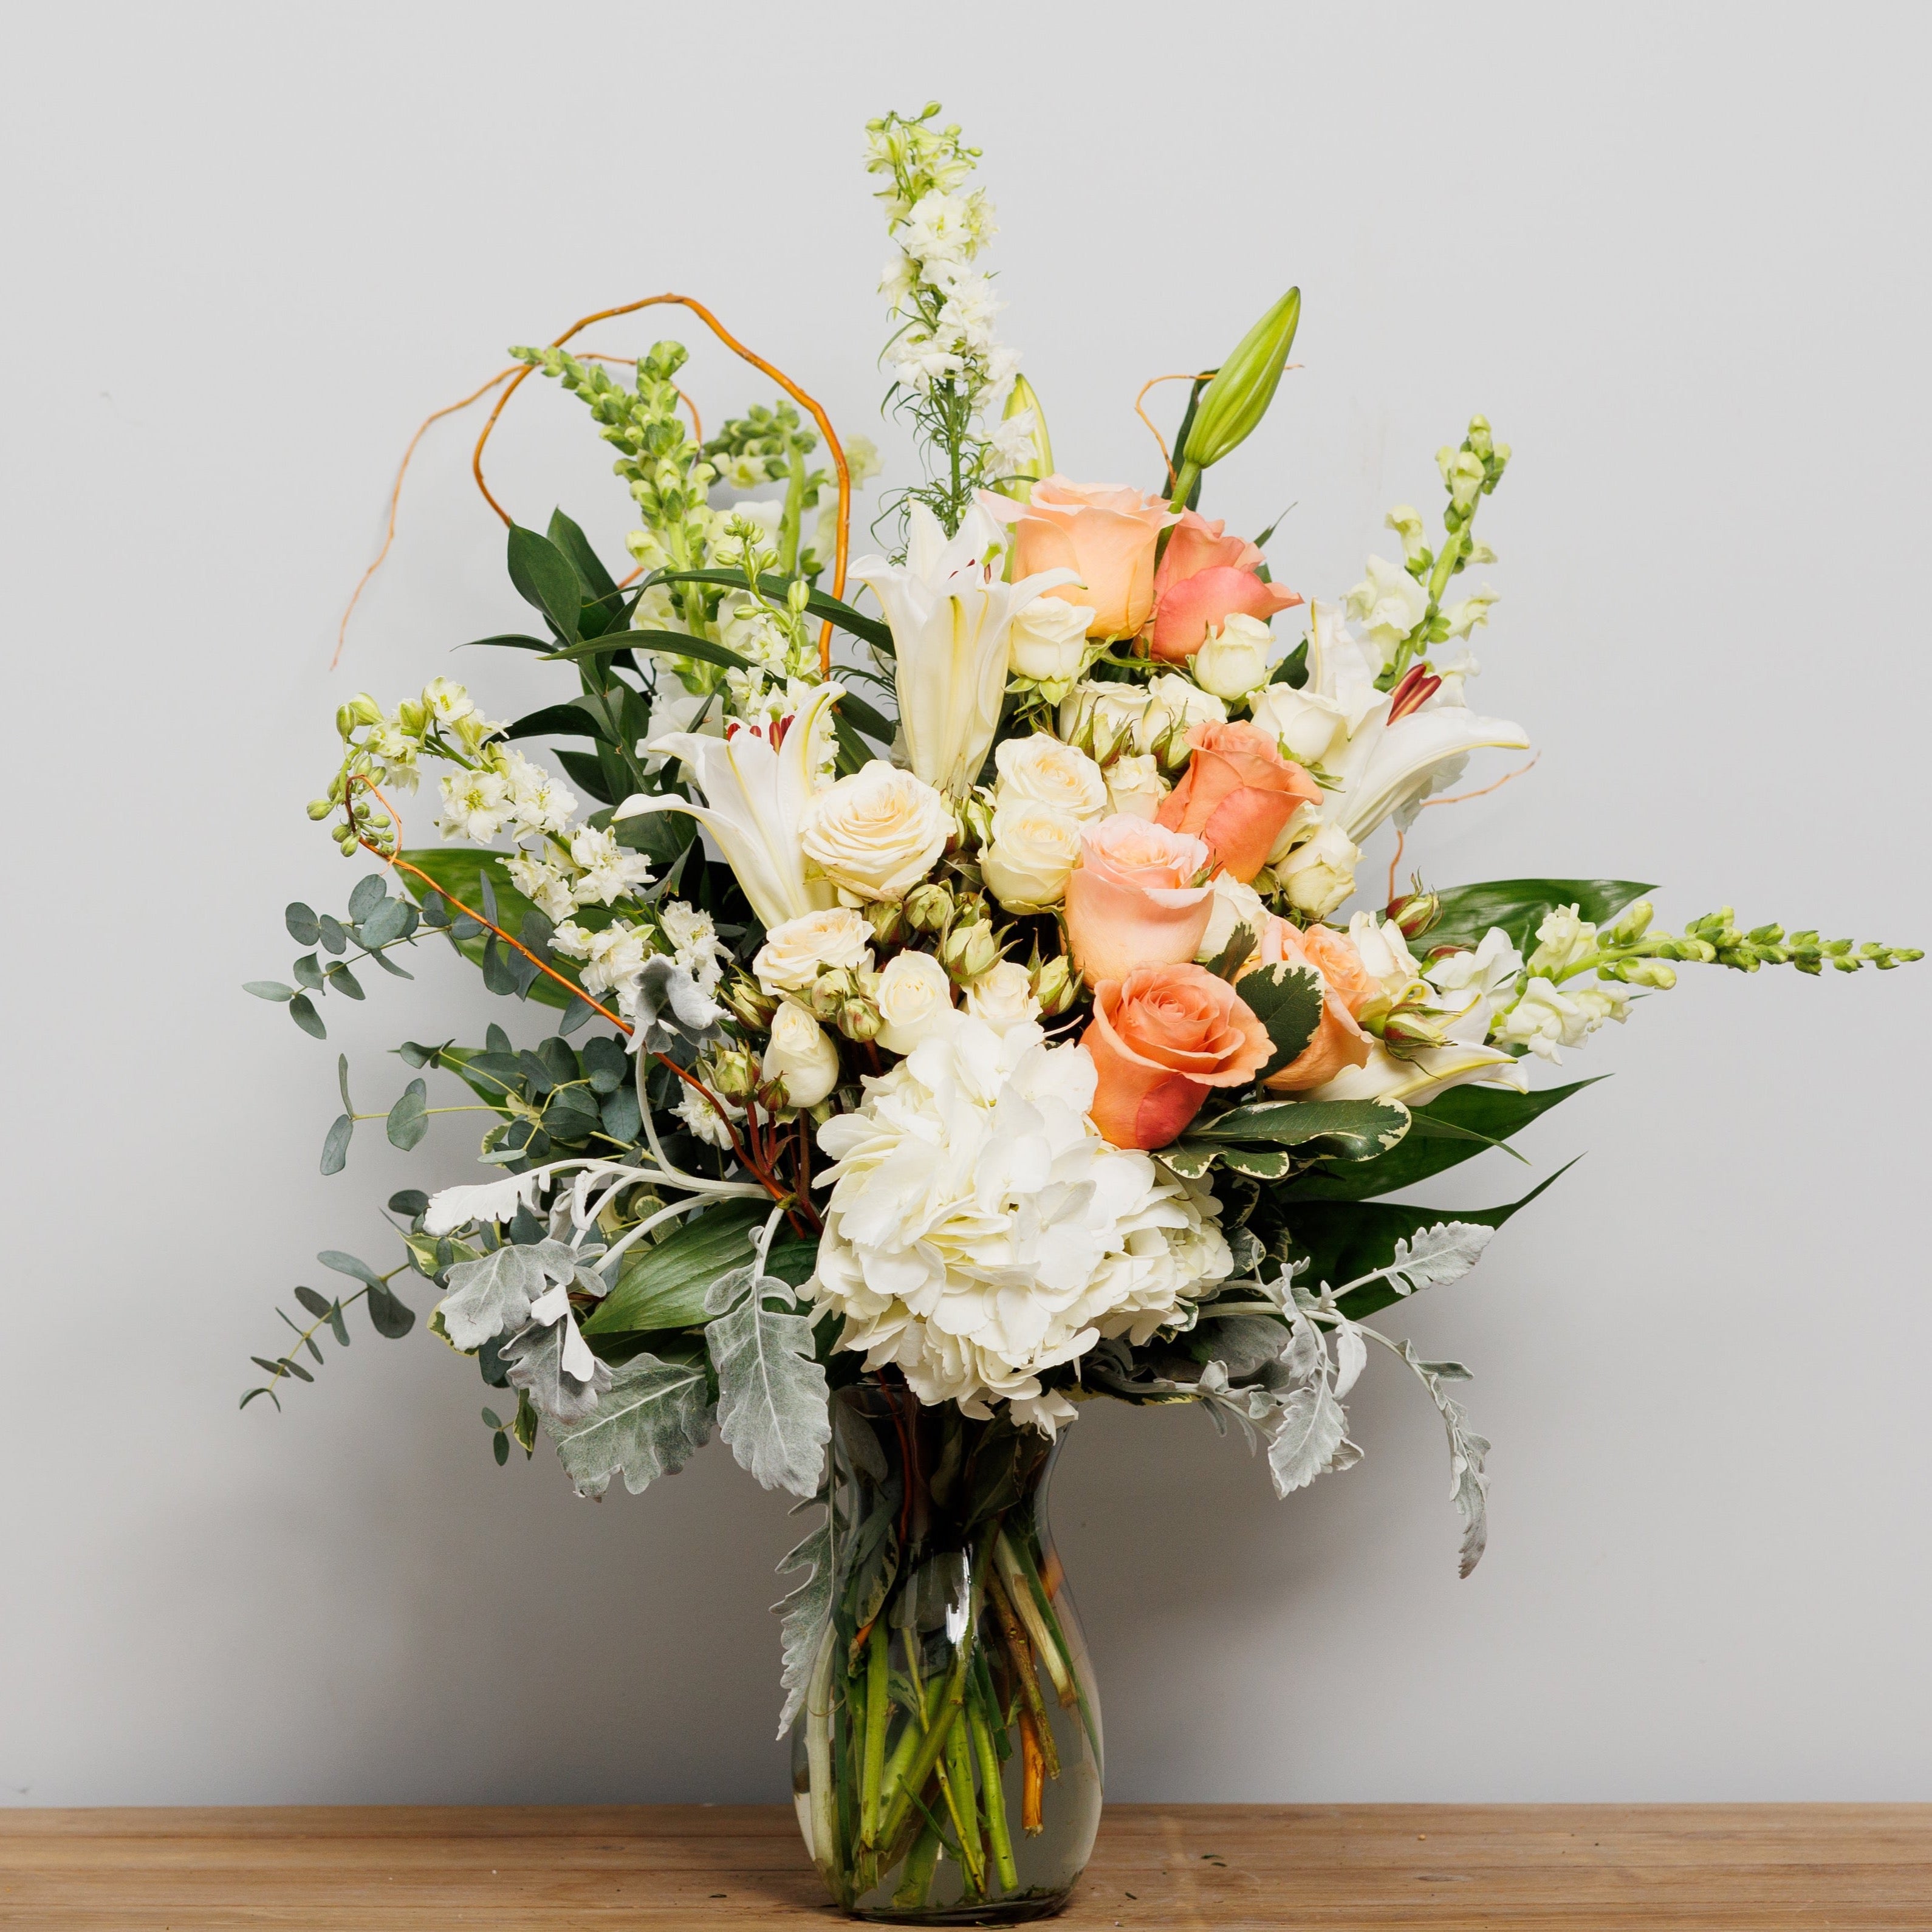 A vase arrangement with a white hydrangea, peach roses, white lilies and curly willow.